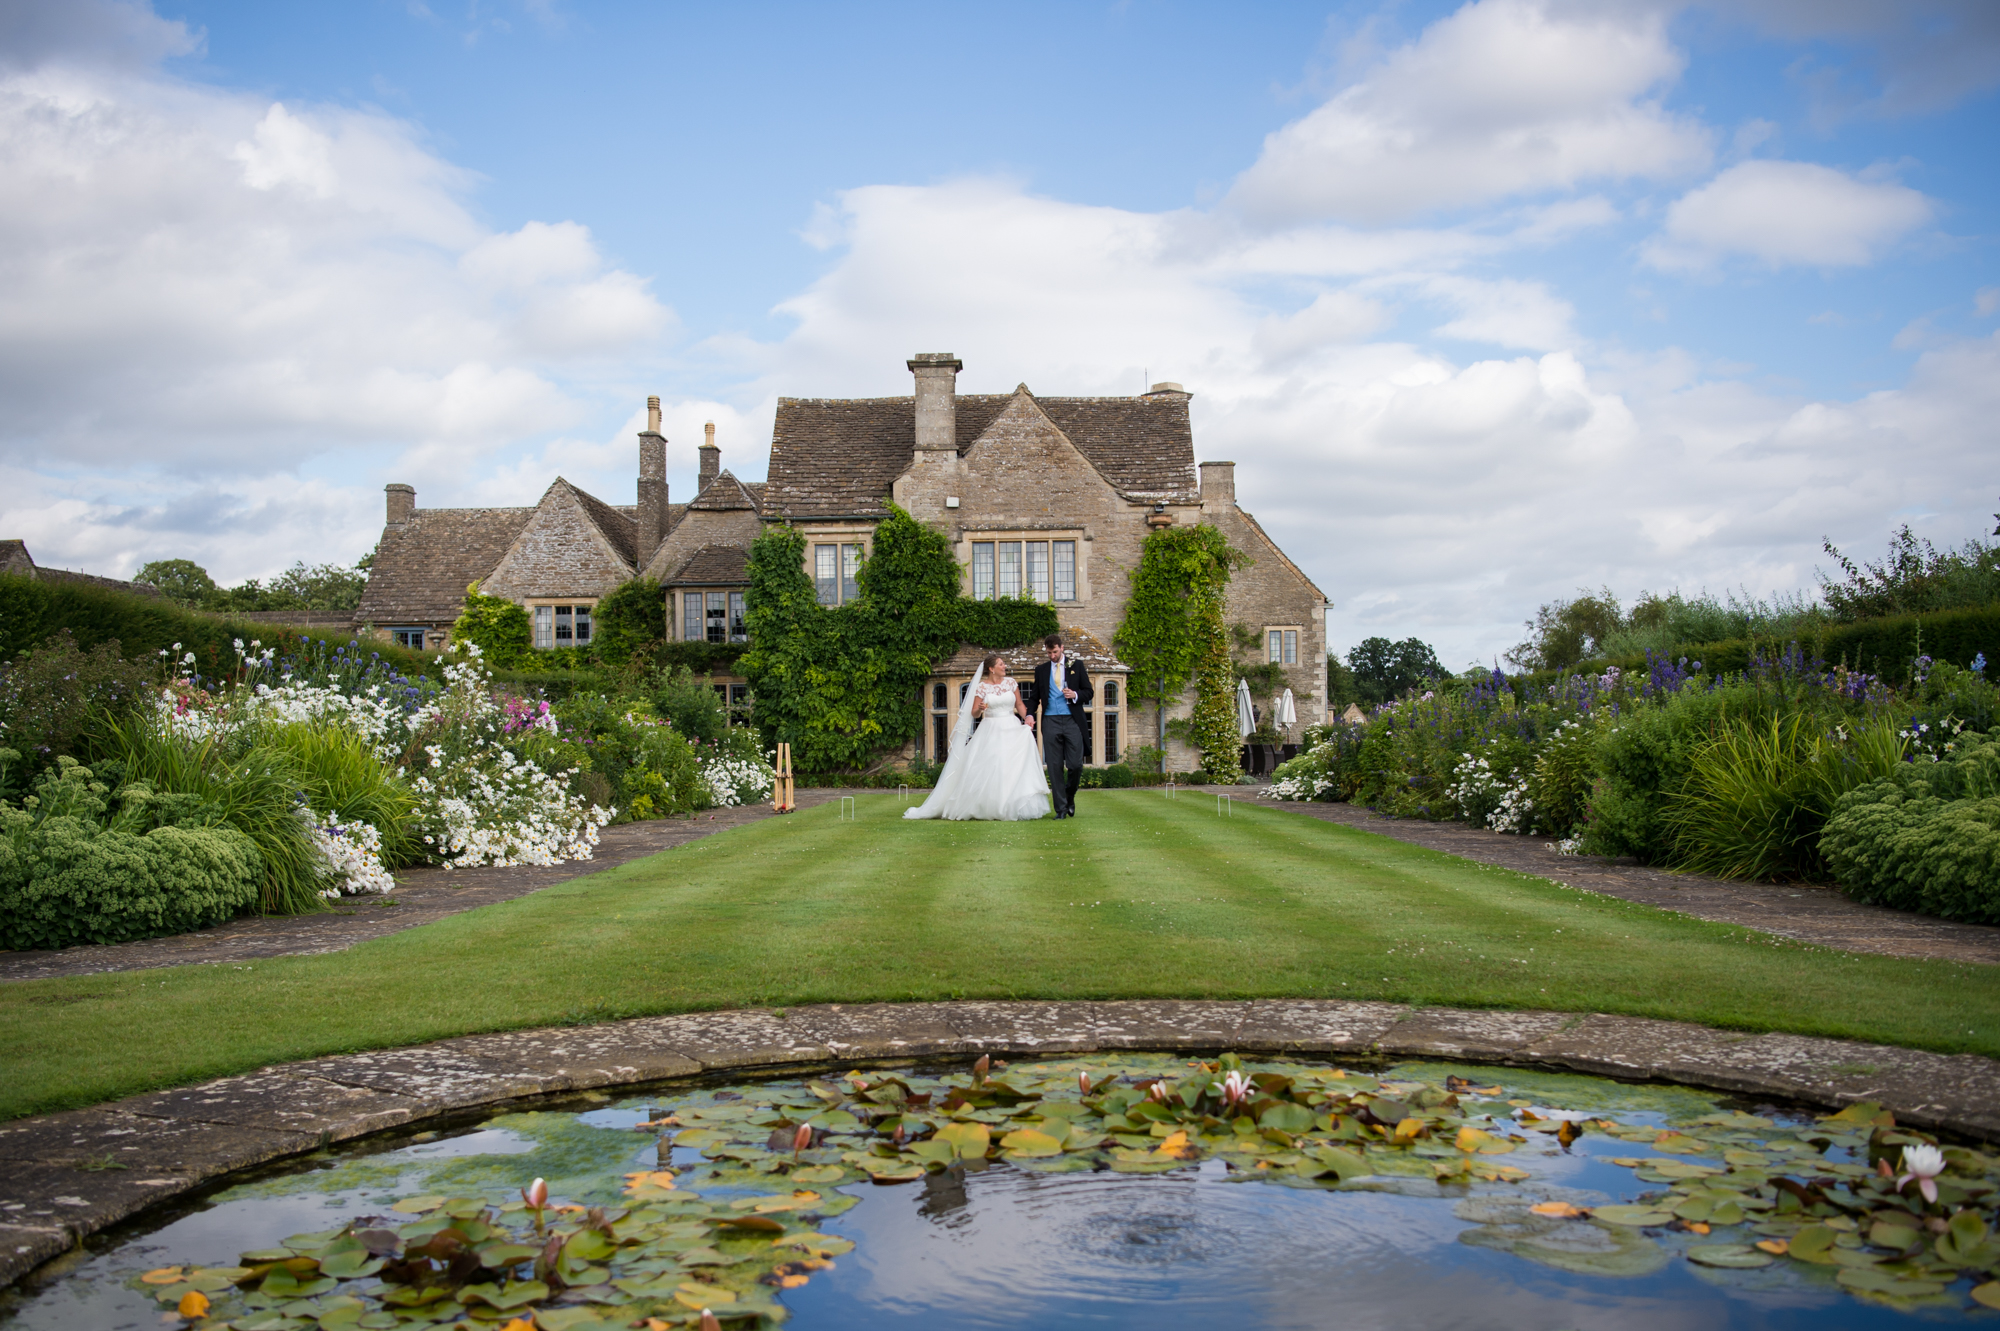 Bride and groom walking in the gardens of Whatley Manor with the wedding venue in the background